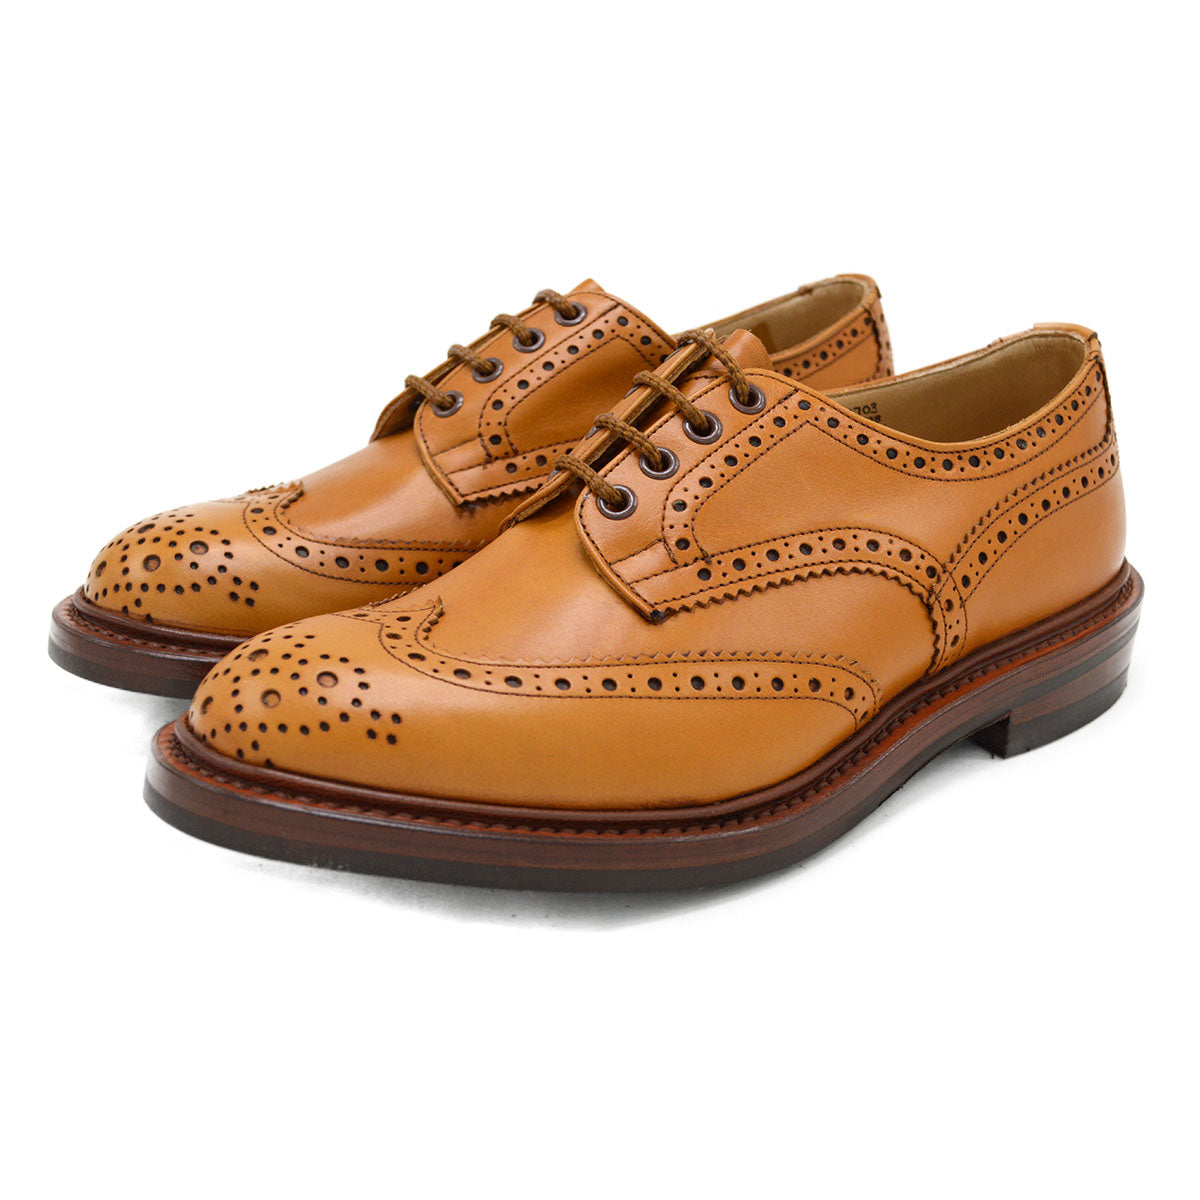 Trickers BOURTON Dainite - Acorn - A Fine Pair of Shoes - High Quality ...